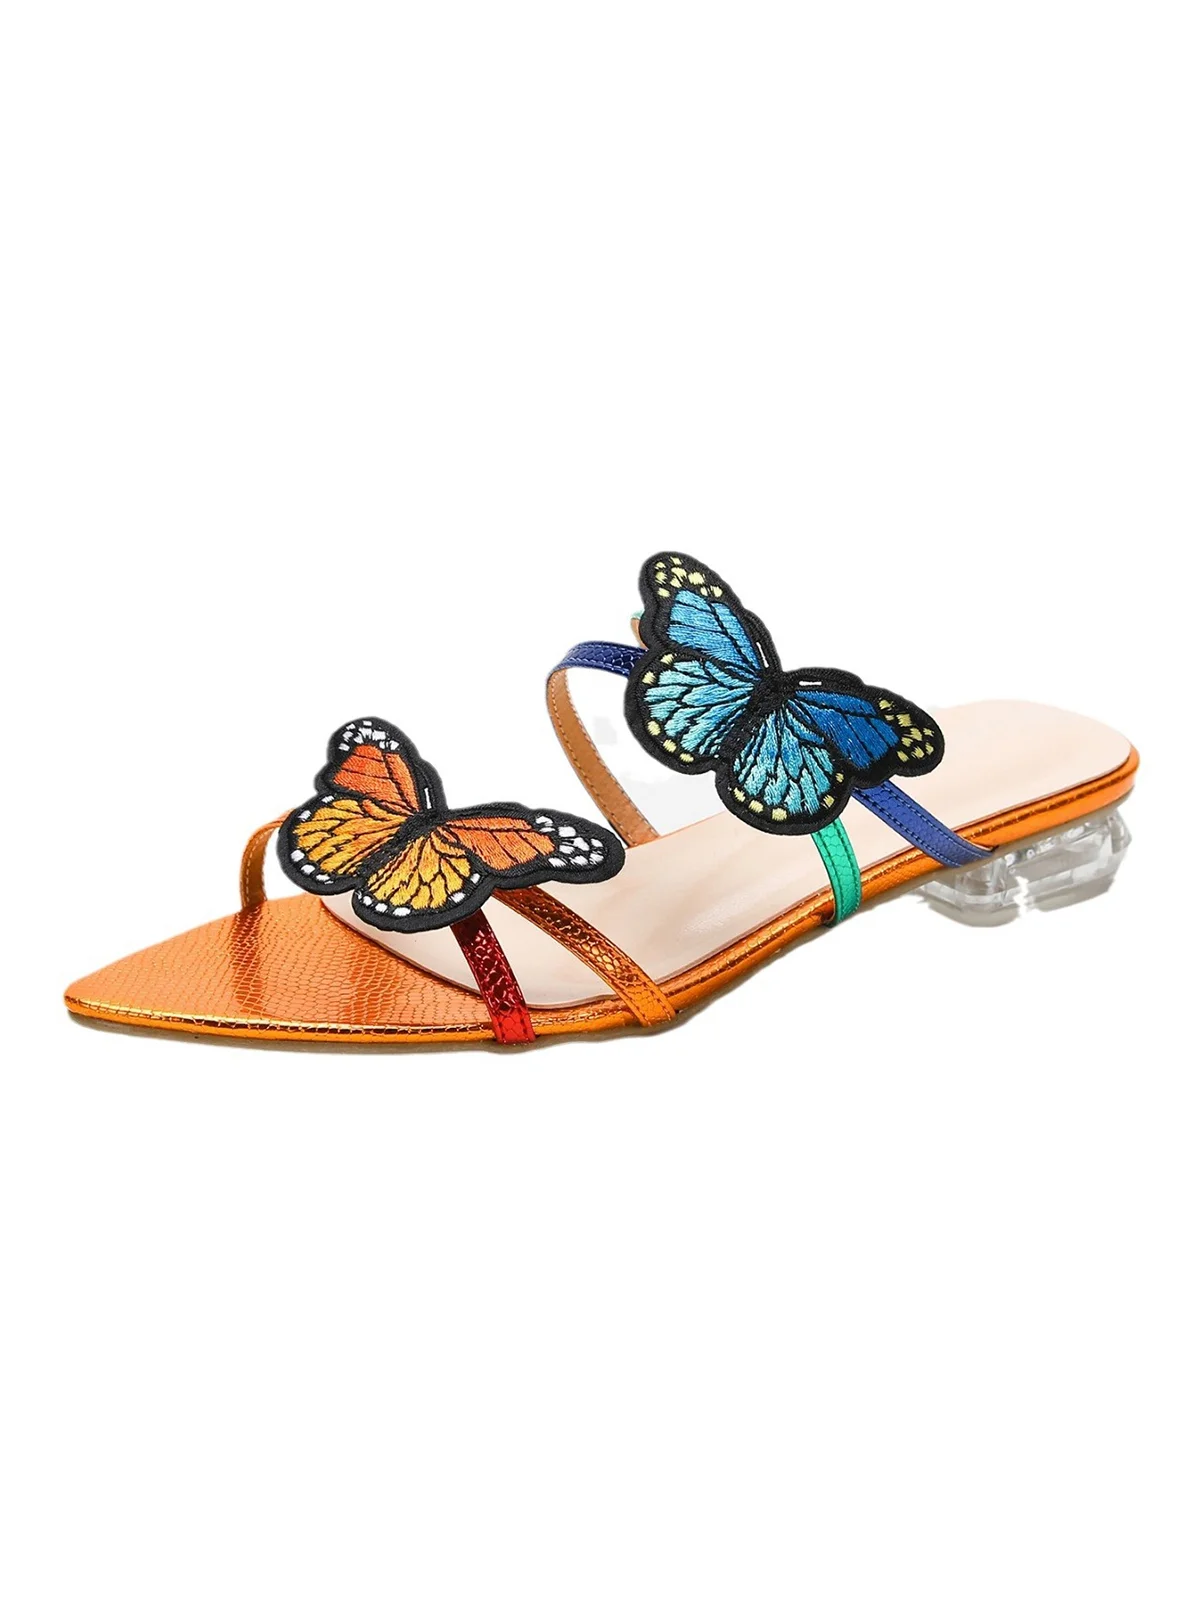 Embroidered Butterfly Transparent Low Heel Slide Sandals